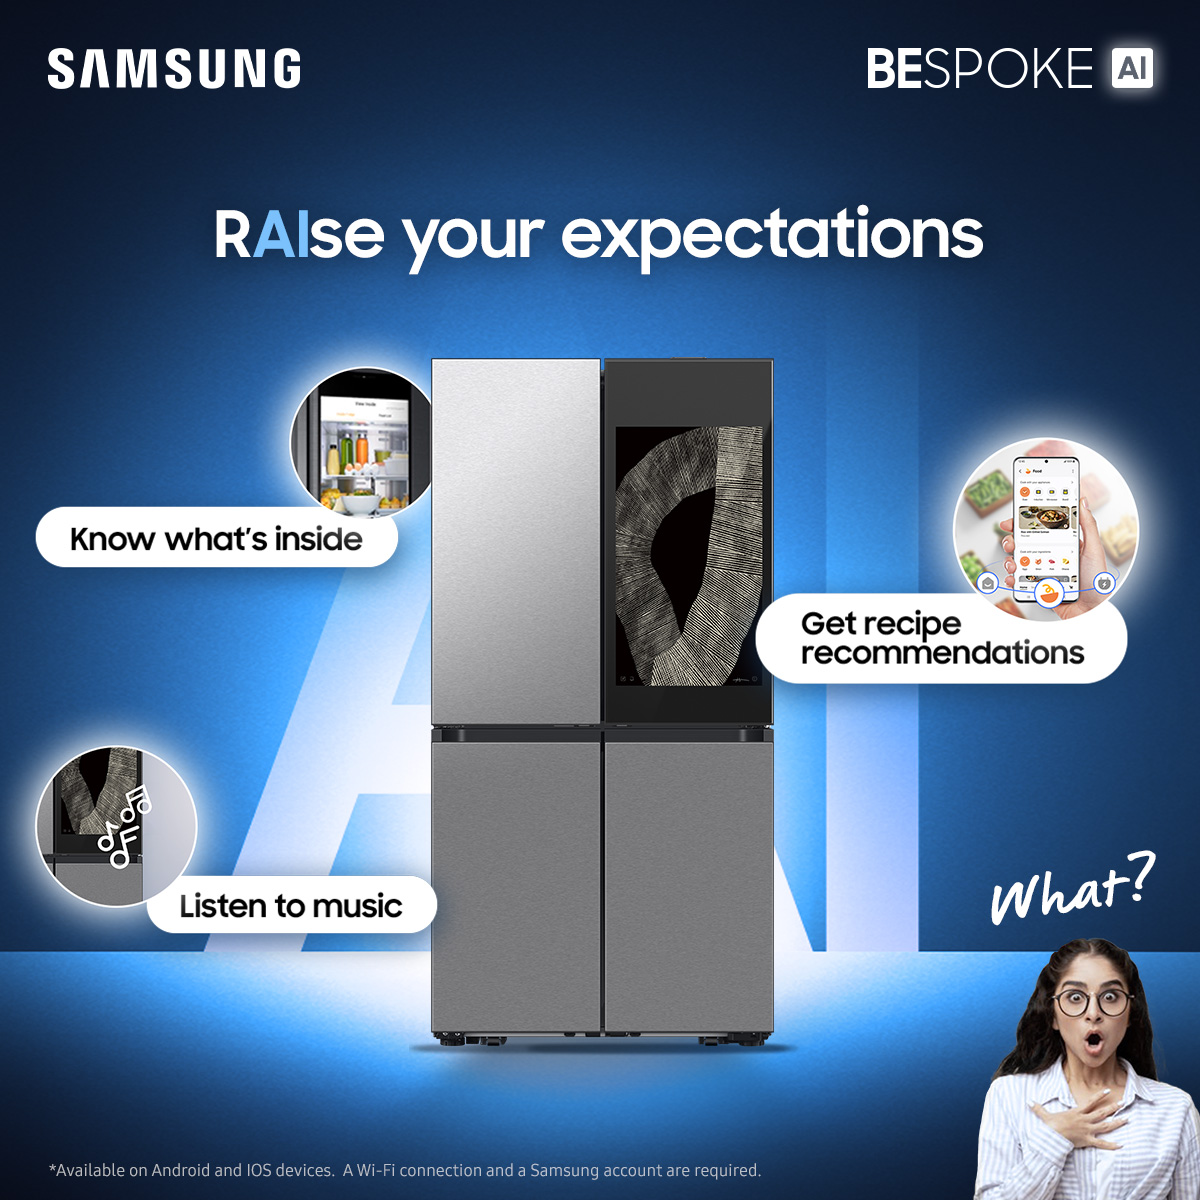 Keep connected to your family and home with our all-new Bespoke AI Refrigerator 😍. #BespokeAI #DoMoreWithLess #ThisIsConnectedLiving #SamsungBespoke #Bespoke #Samsung